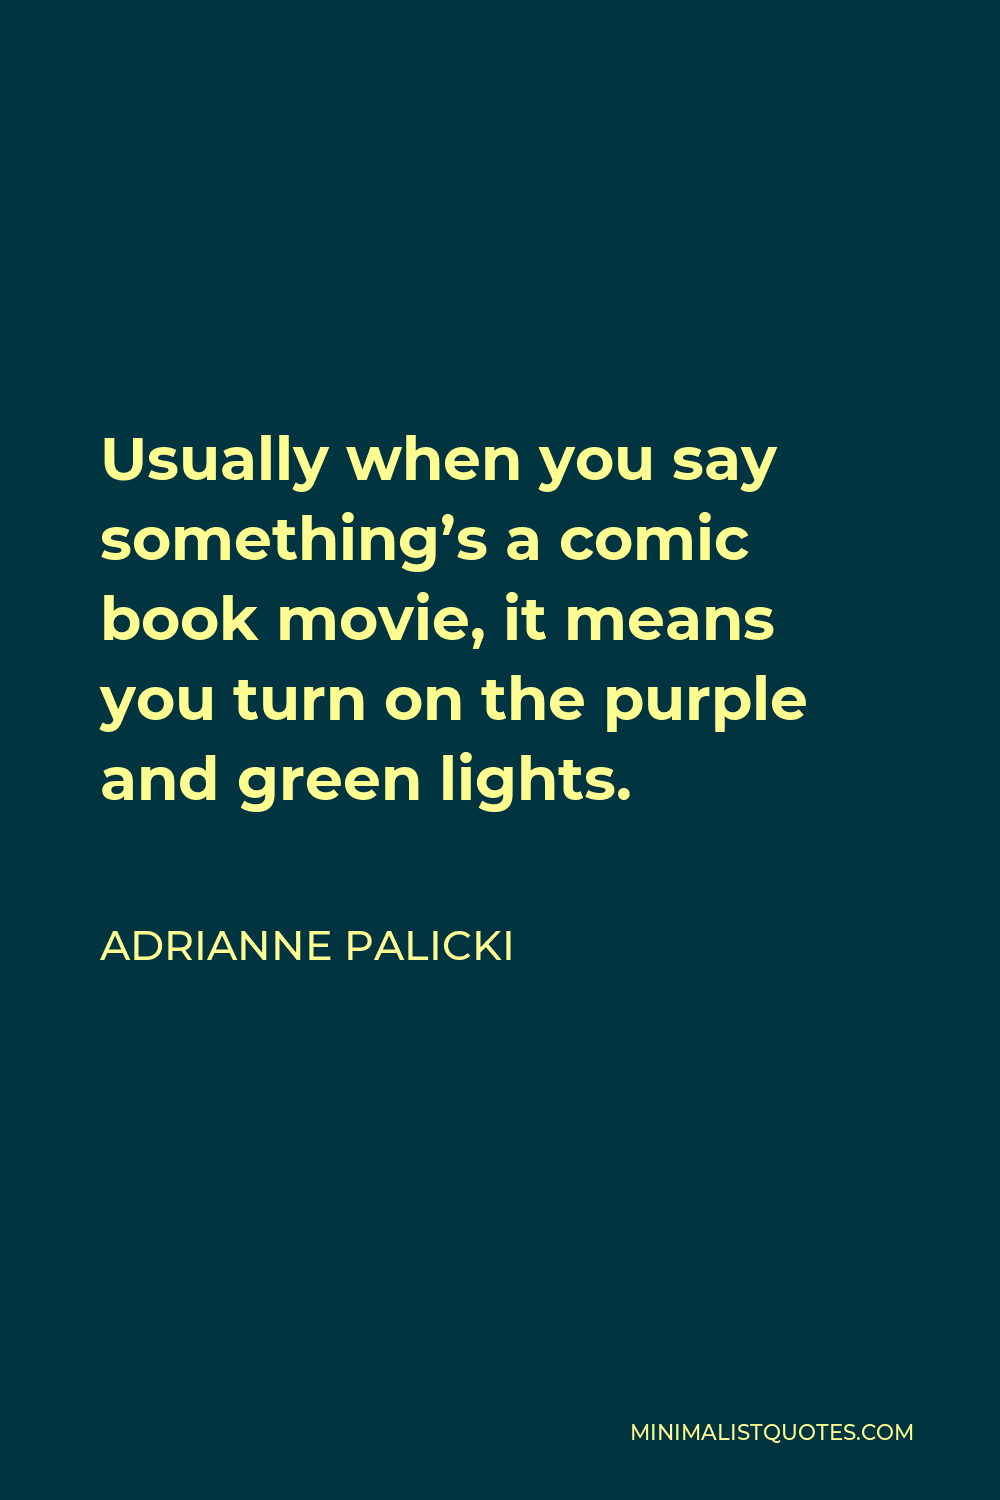 Adrianne Palicki Quote - Usually when you say something’s a comic book movie, it means you turn on the purple and green lights.